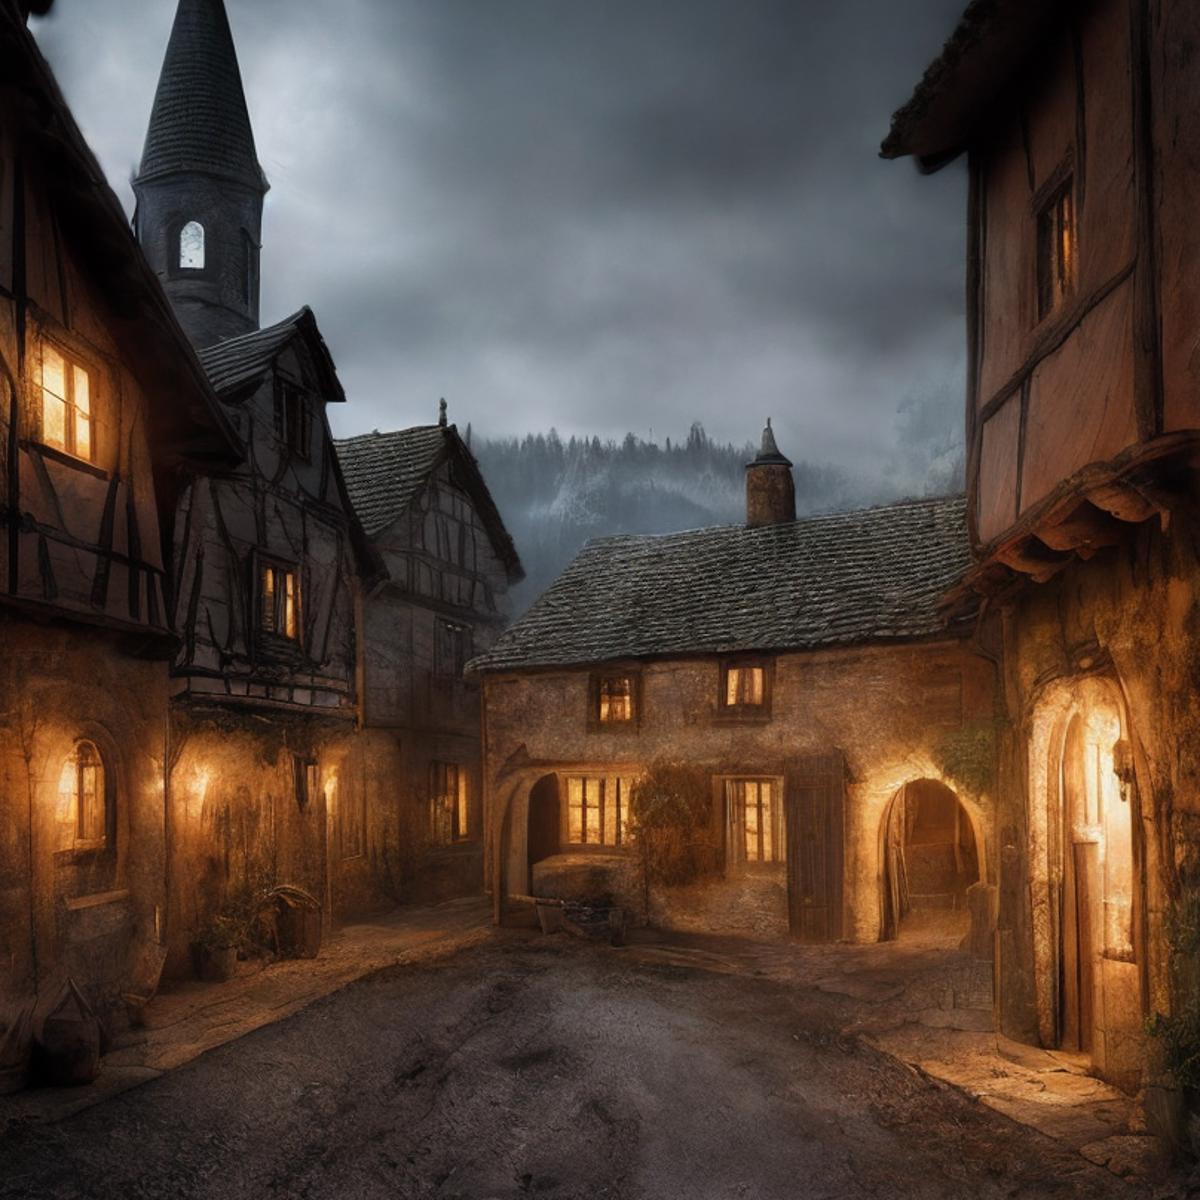 Realms of Darkness image by ericheisner650